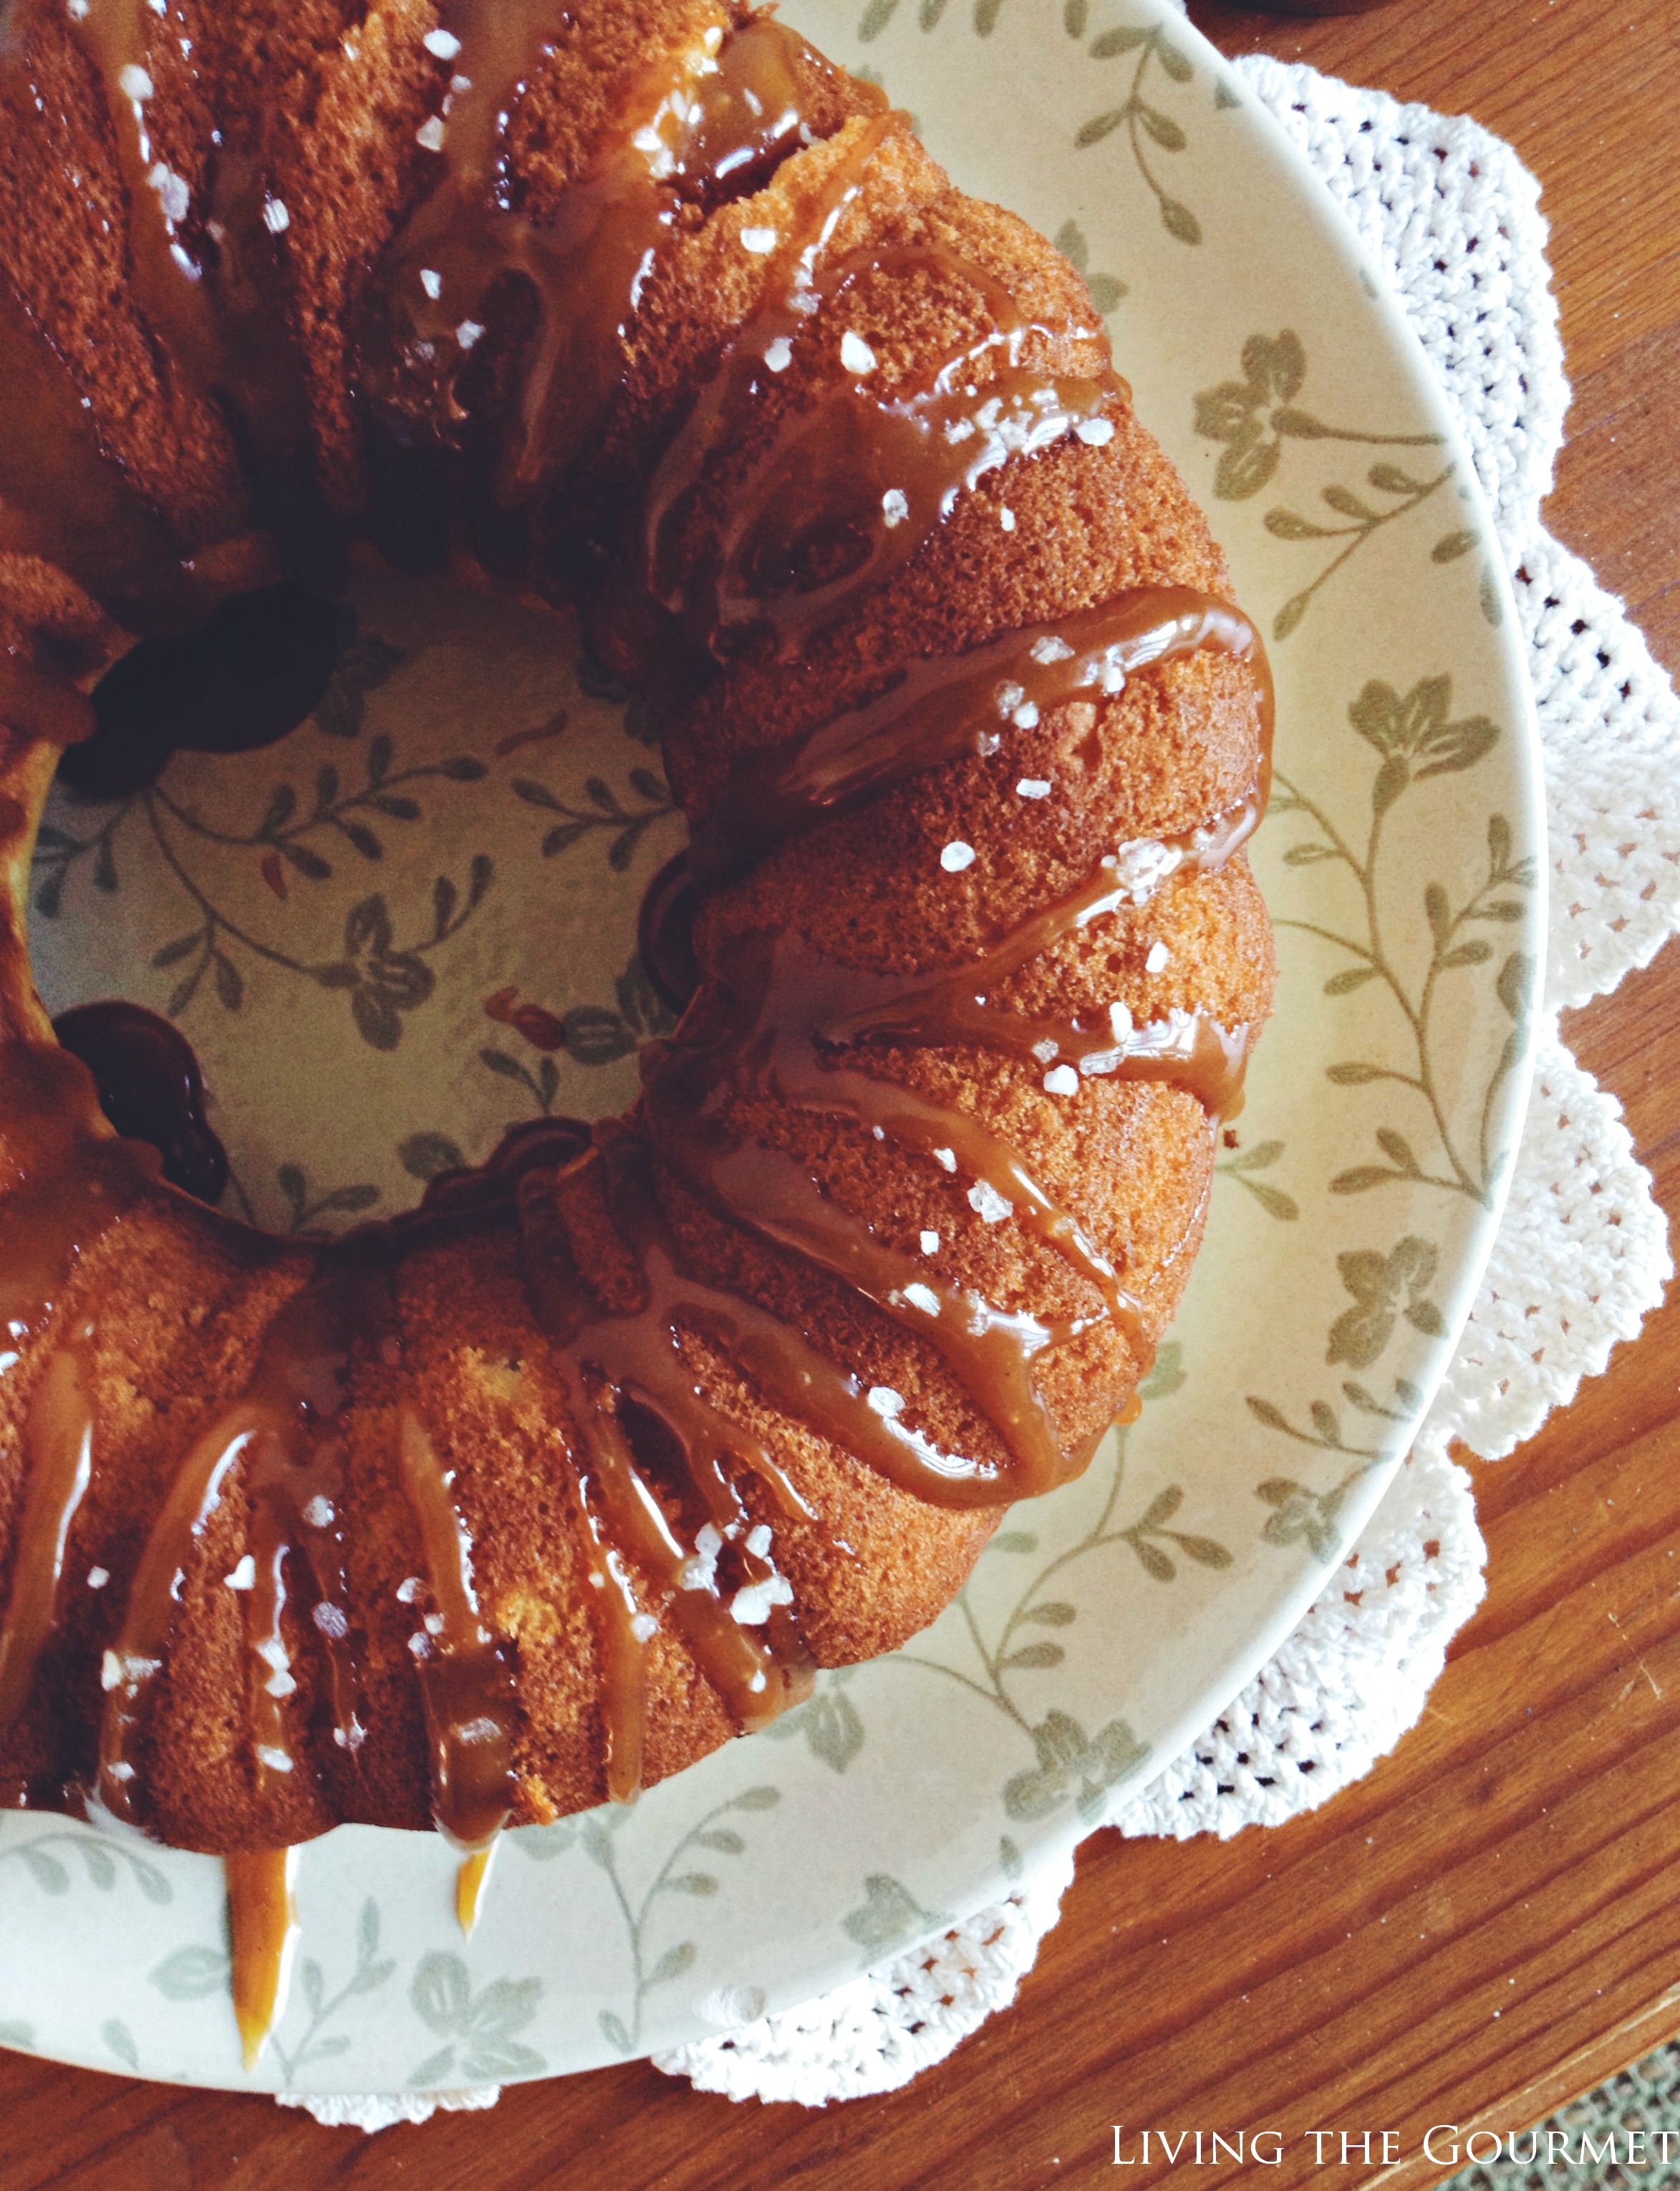 Living the Gourmet: Classic Vanilla Bundt Cake with a Salted Caramel Drizzle